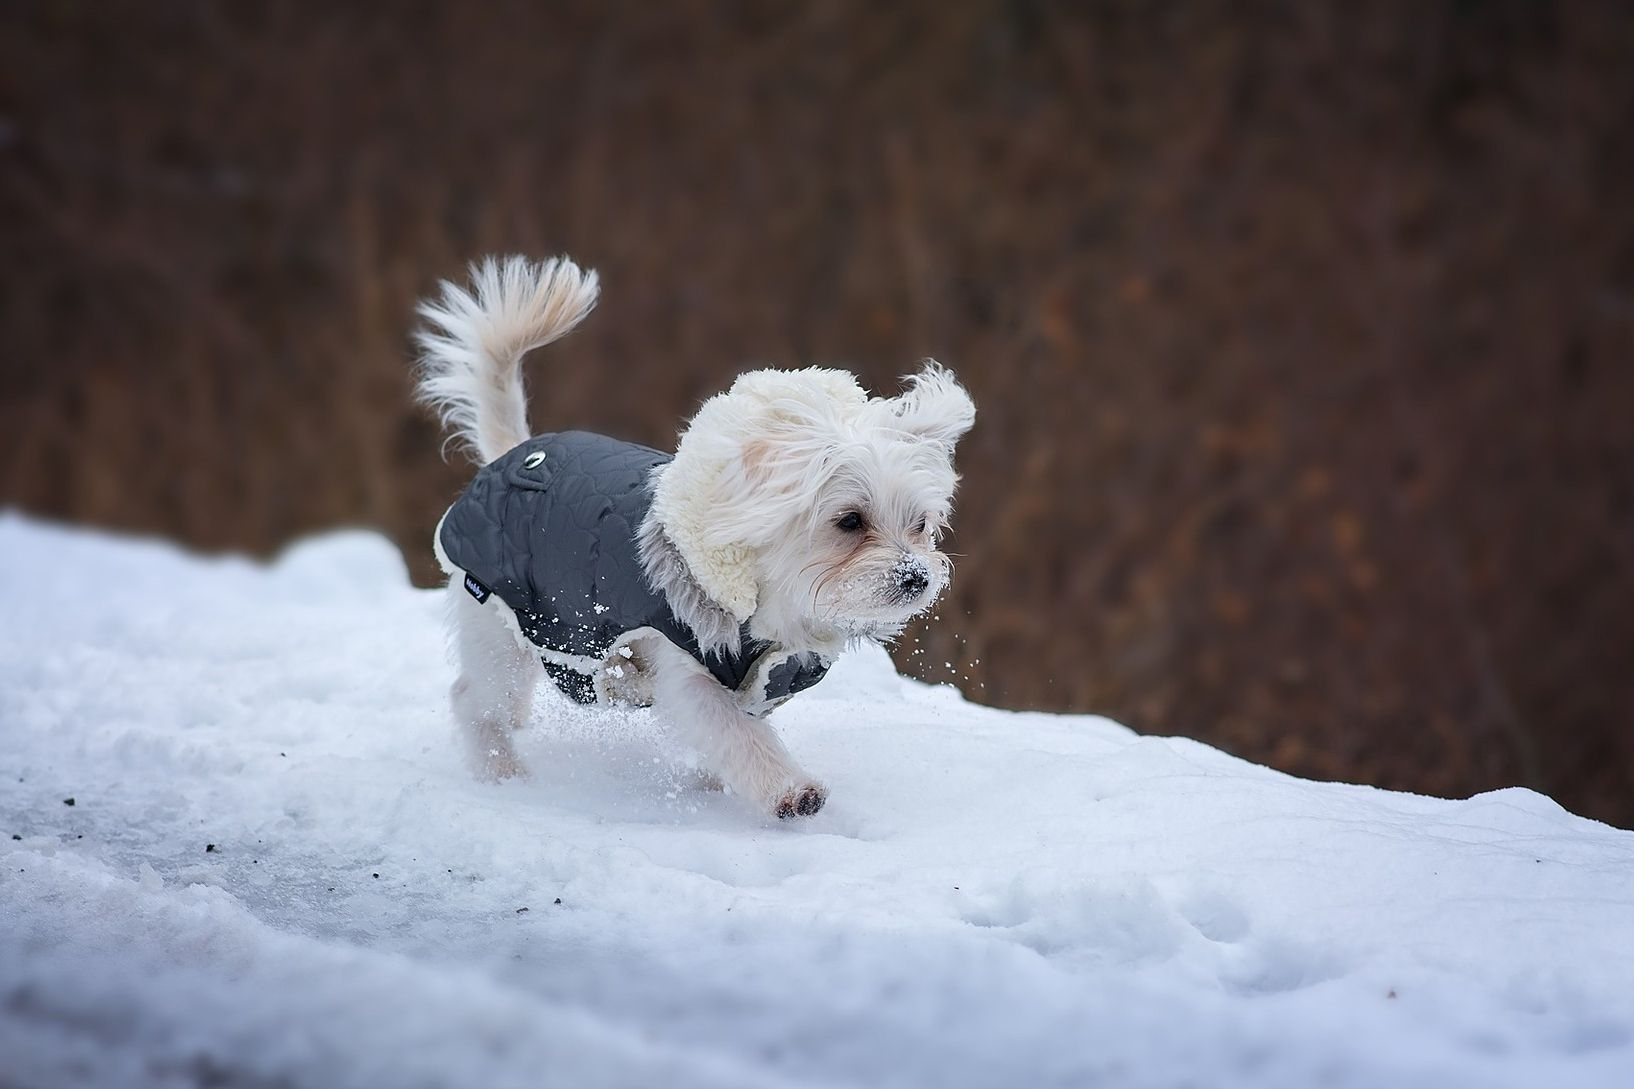 Easy Knitting Pattern For Dog Coat Free Sewing Pattern For A Warm Weatherproof Dog Coat